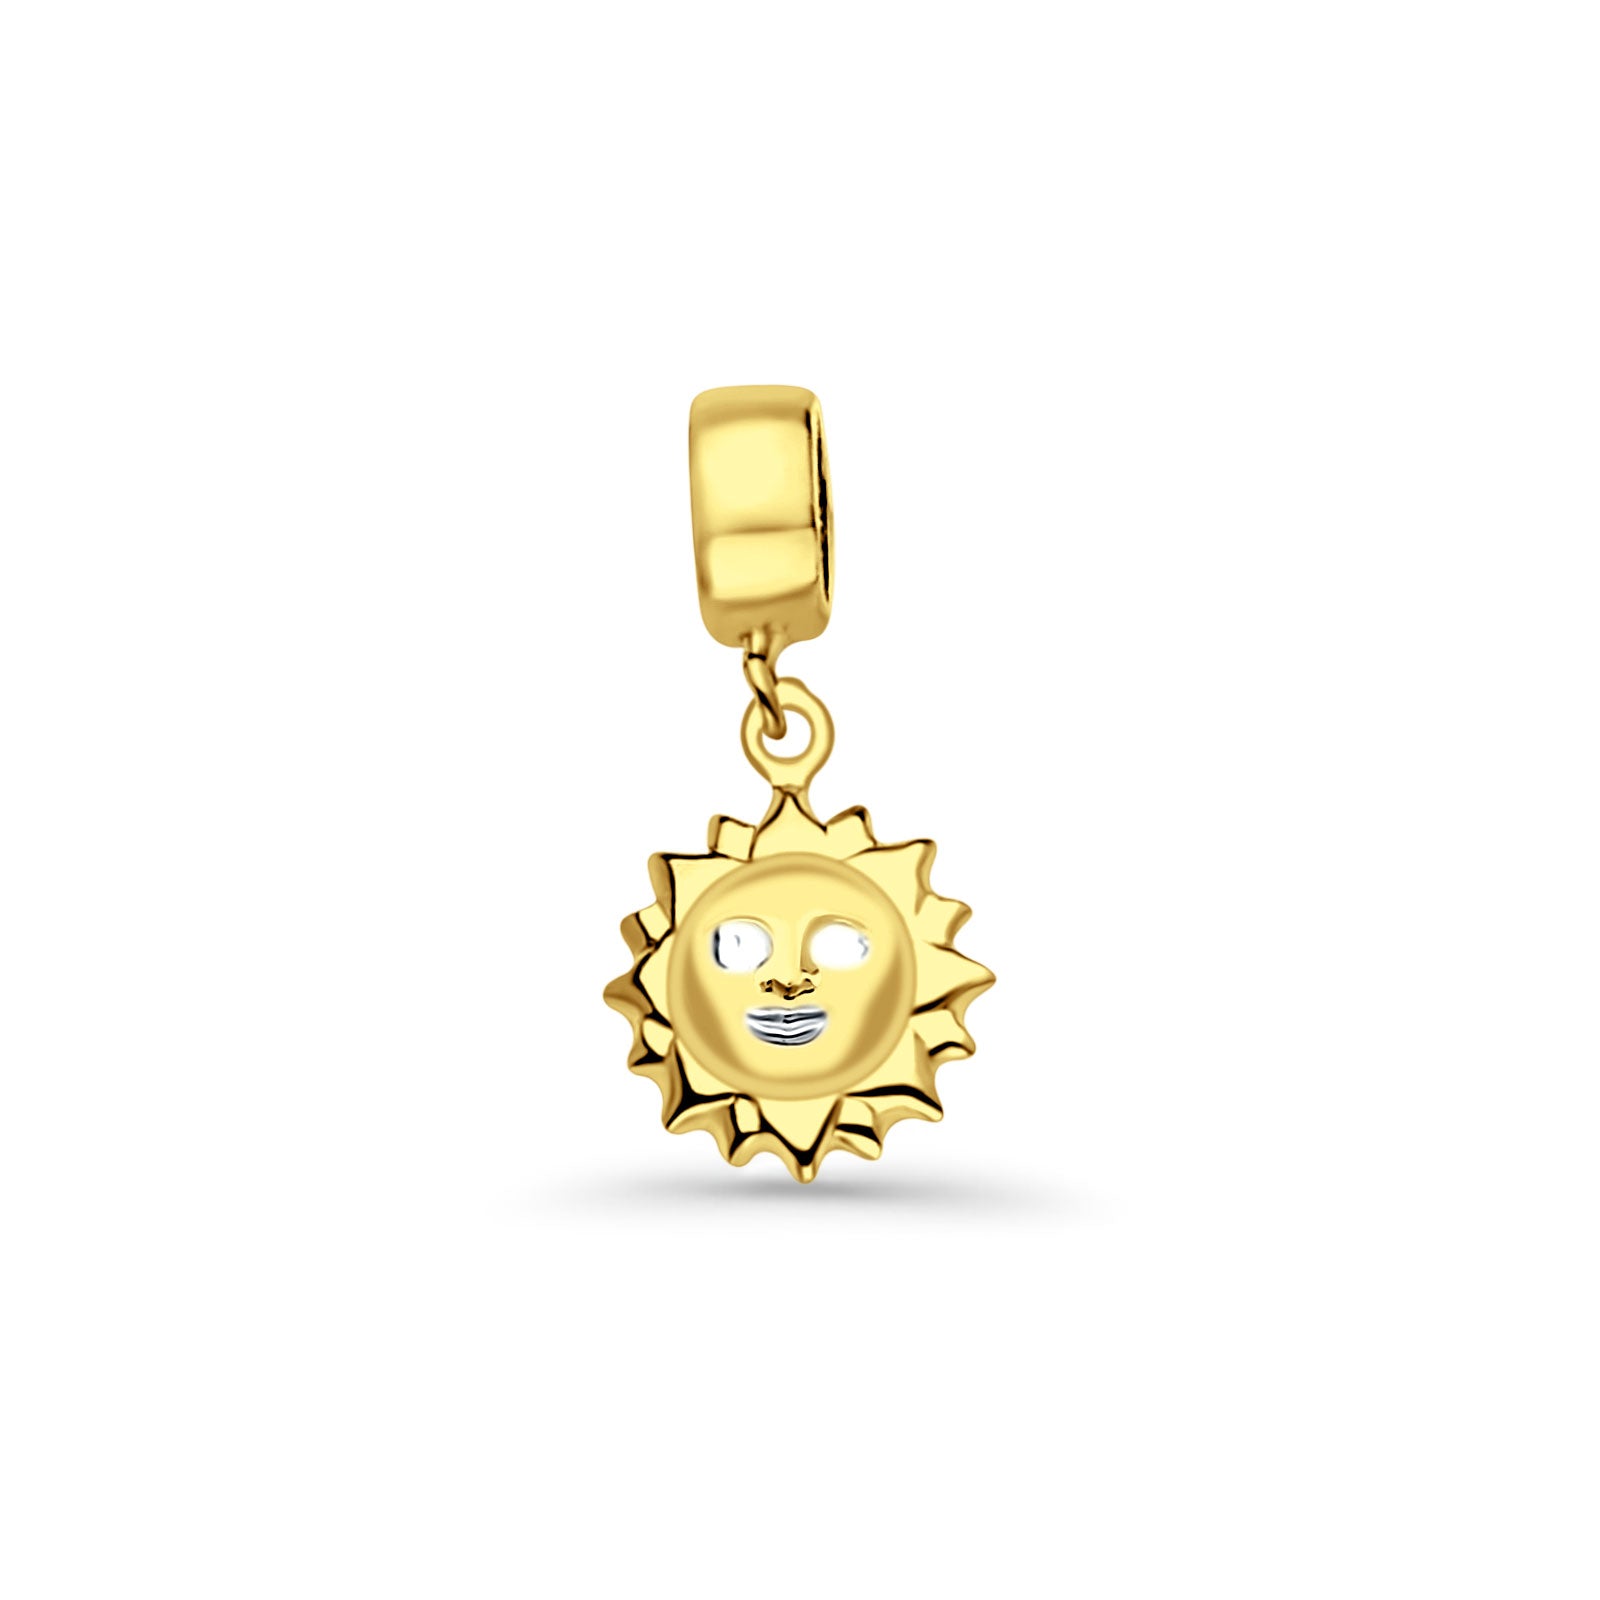 14K Yellow Gold Sun Charm for Mix&Match Pendant 19mmX9mm With 16 Inch To 22 Inch 0.5MM Width Box Chain Necklace